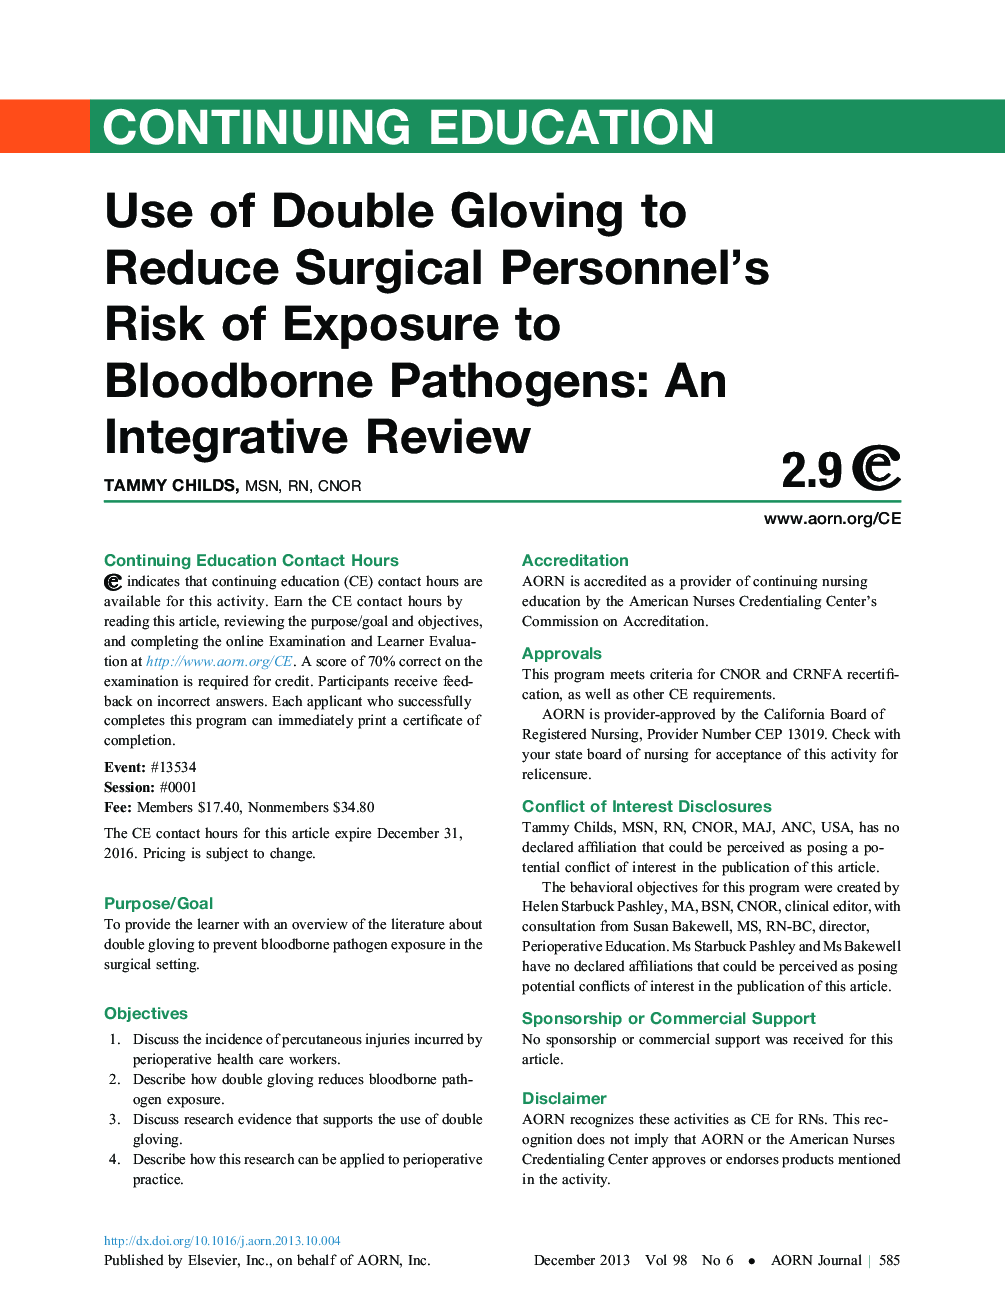 Use of Double Gloving to Reduce Surgical Personnel's Risk of Exposure to Bloodborne Pathogens: An Integrative Review